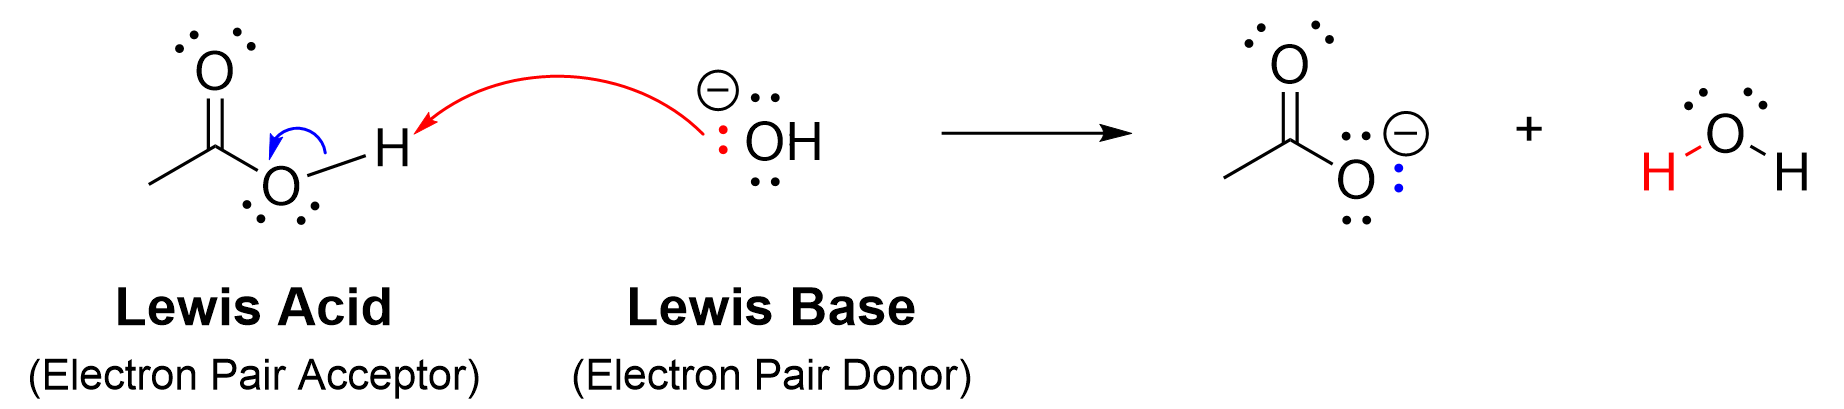 A carboxylic acid with 2 lone pairs on the oxygen attached to the hydrogen labelled lewis acid (electron pair acceptor) and a hydroxide (OH-) with 3 lone pairs labelled lewis base (electron pair donator). A red curved arrow with the tail end from a lone pair on the hydroxide points its head towards the Hydrogen in the Carboxylic Acid. A blue curved arrow begins with the arrow tail at the bond between oxygen and hydrogen on the carboxylic acid pointing the arrowhead towards the adjacent oxygen. On the right of a horizontal arrow is the carboxylate (RCOO-) and water.